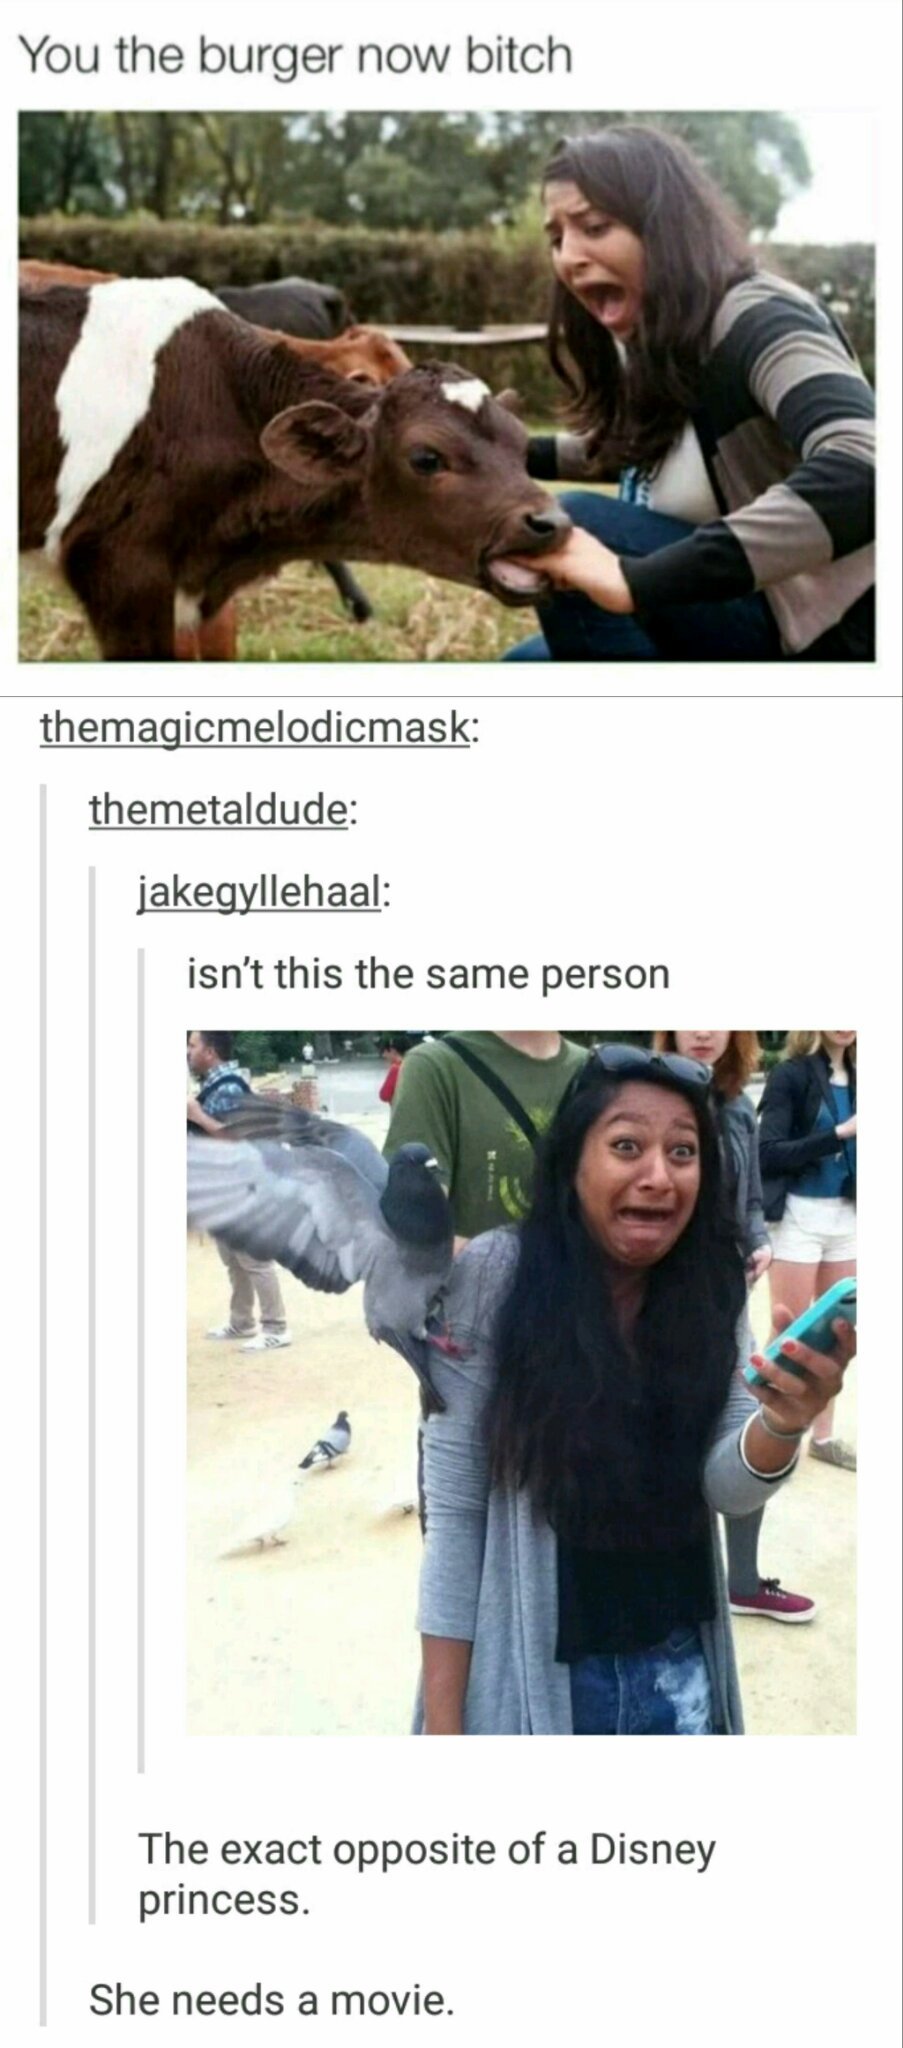 3rd comment is as good with animals as this person - meme